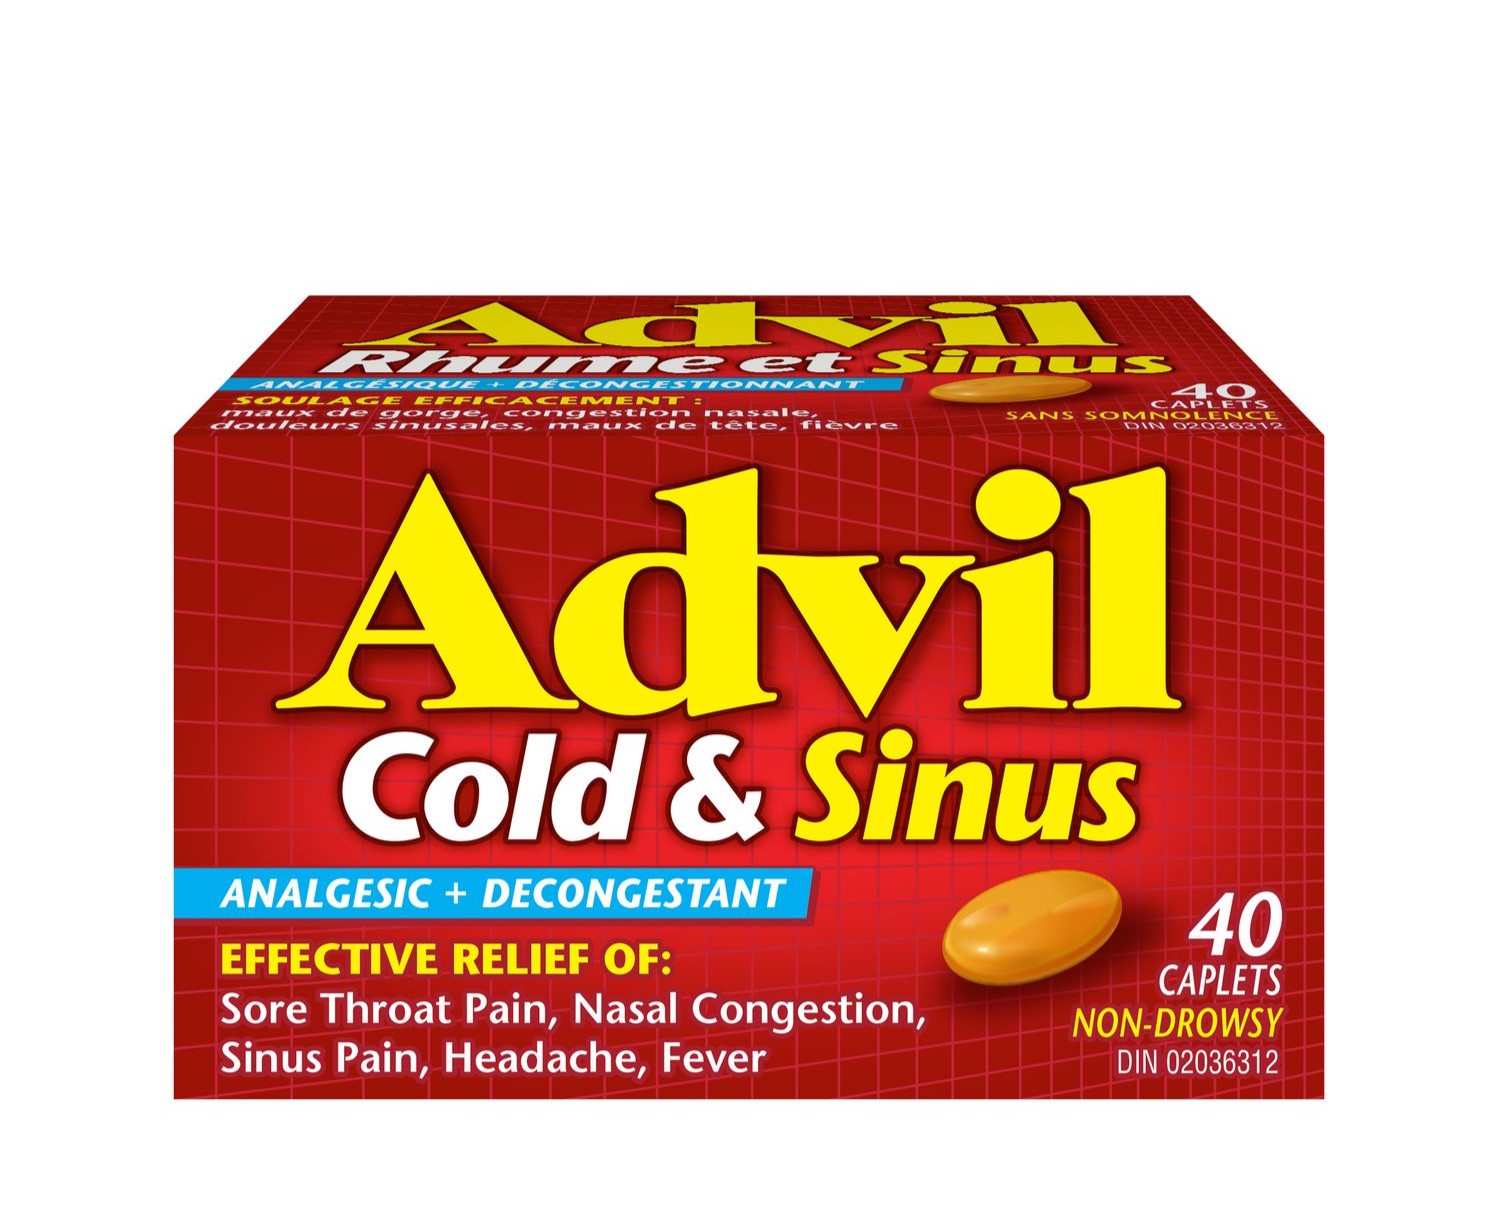 Shocking Side Effect Of Advil Cold And Sinus: Headaches Revealed!